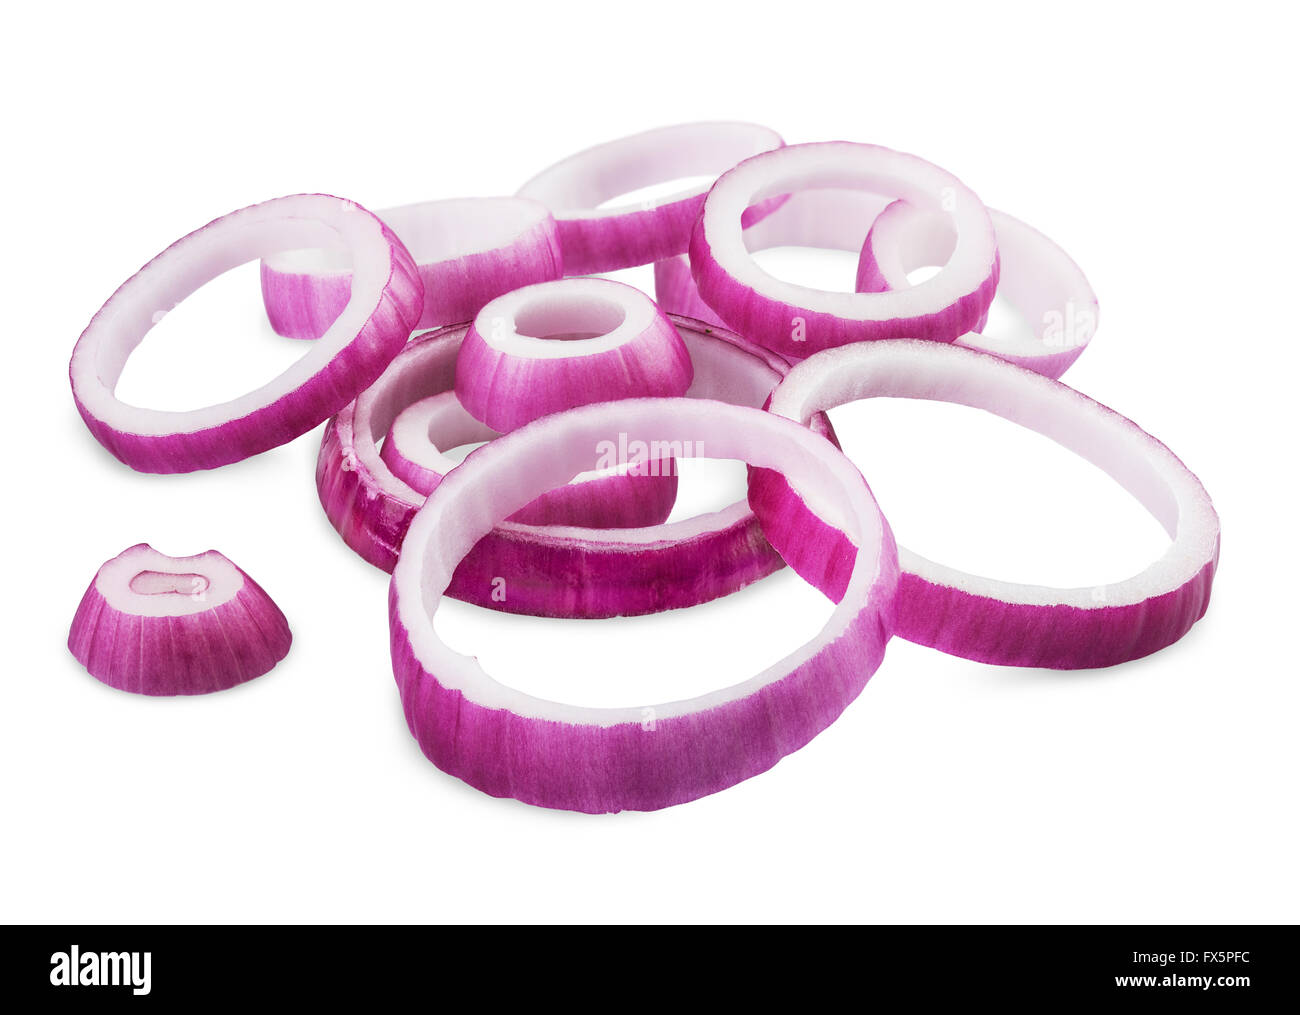 sliced onion png